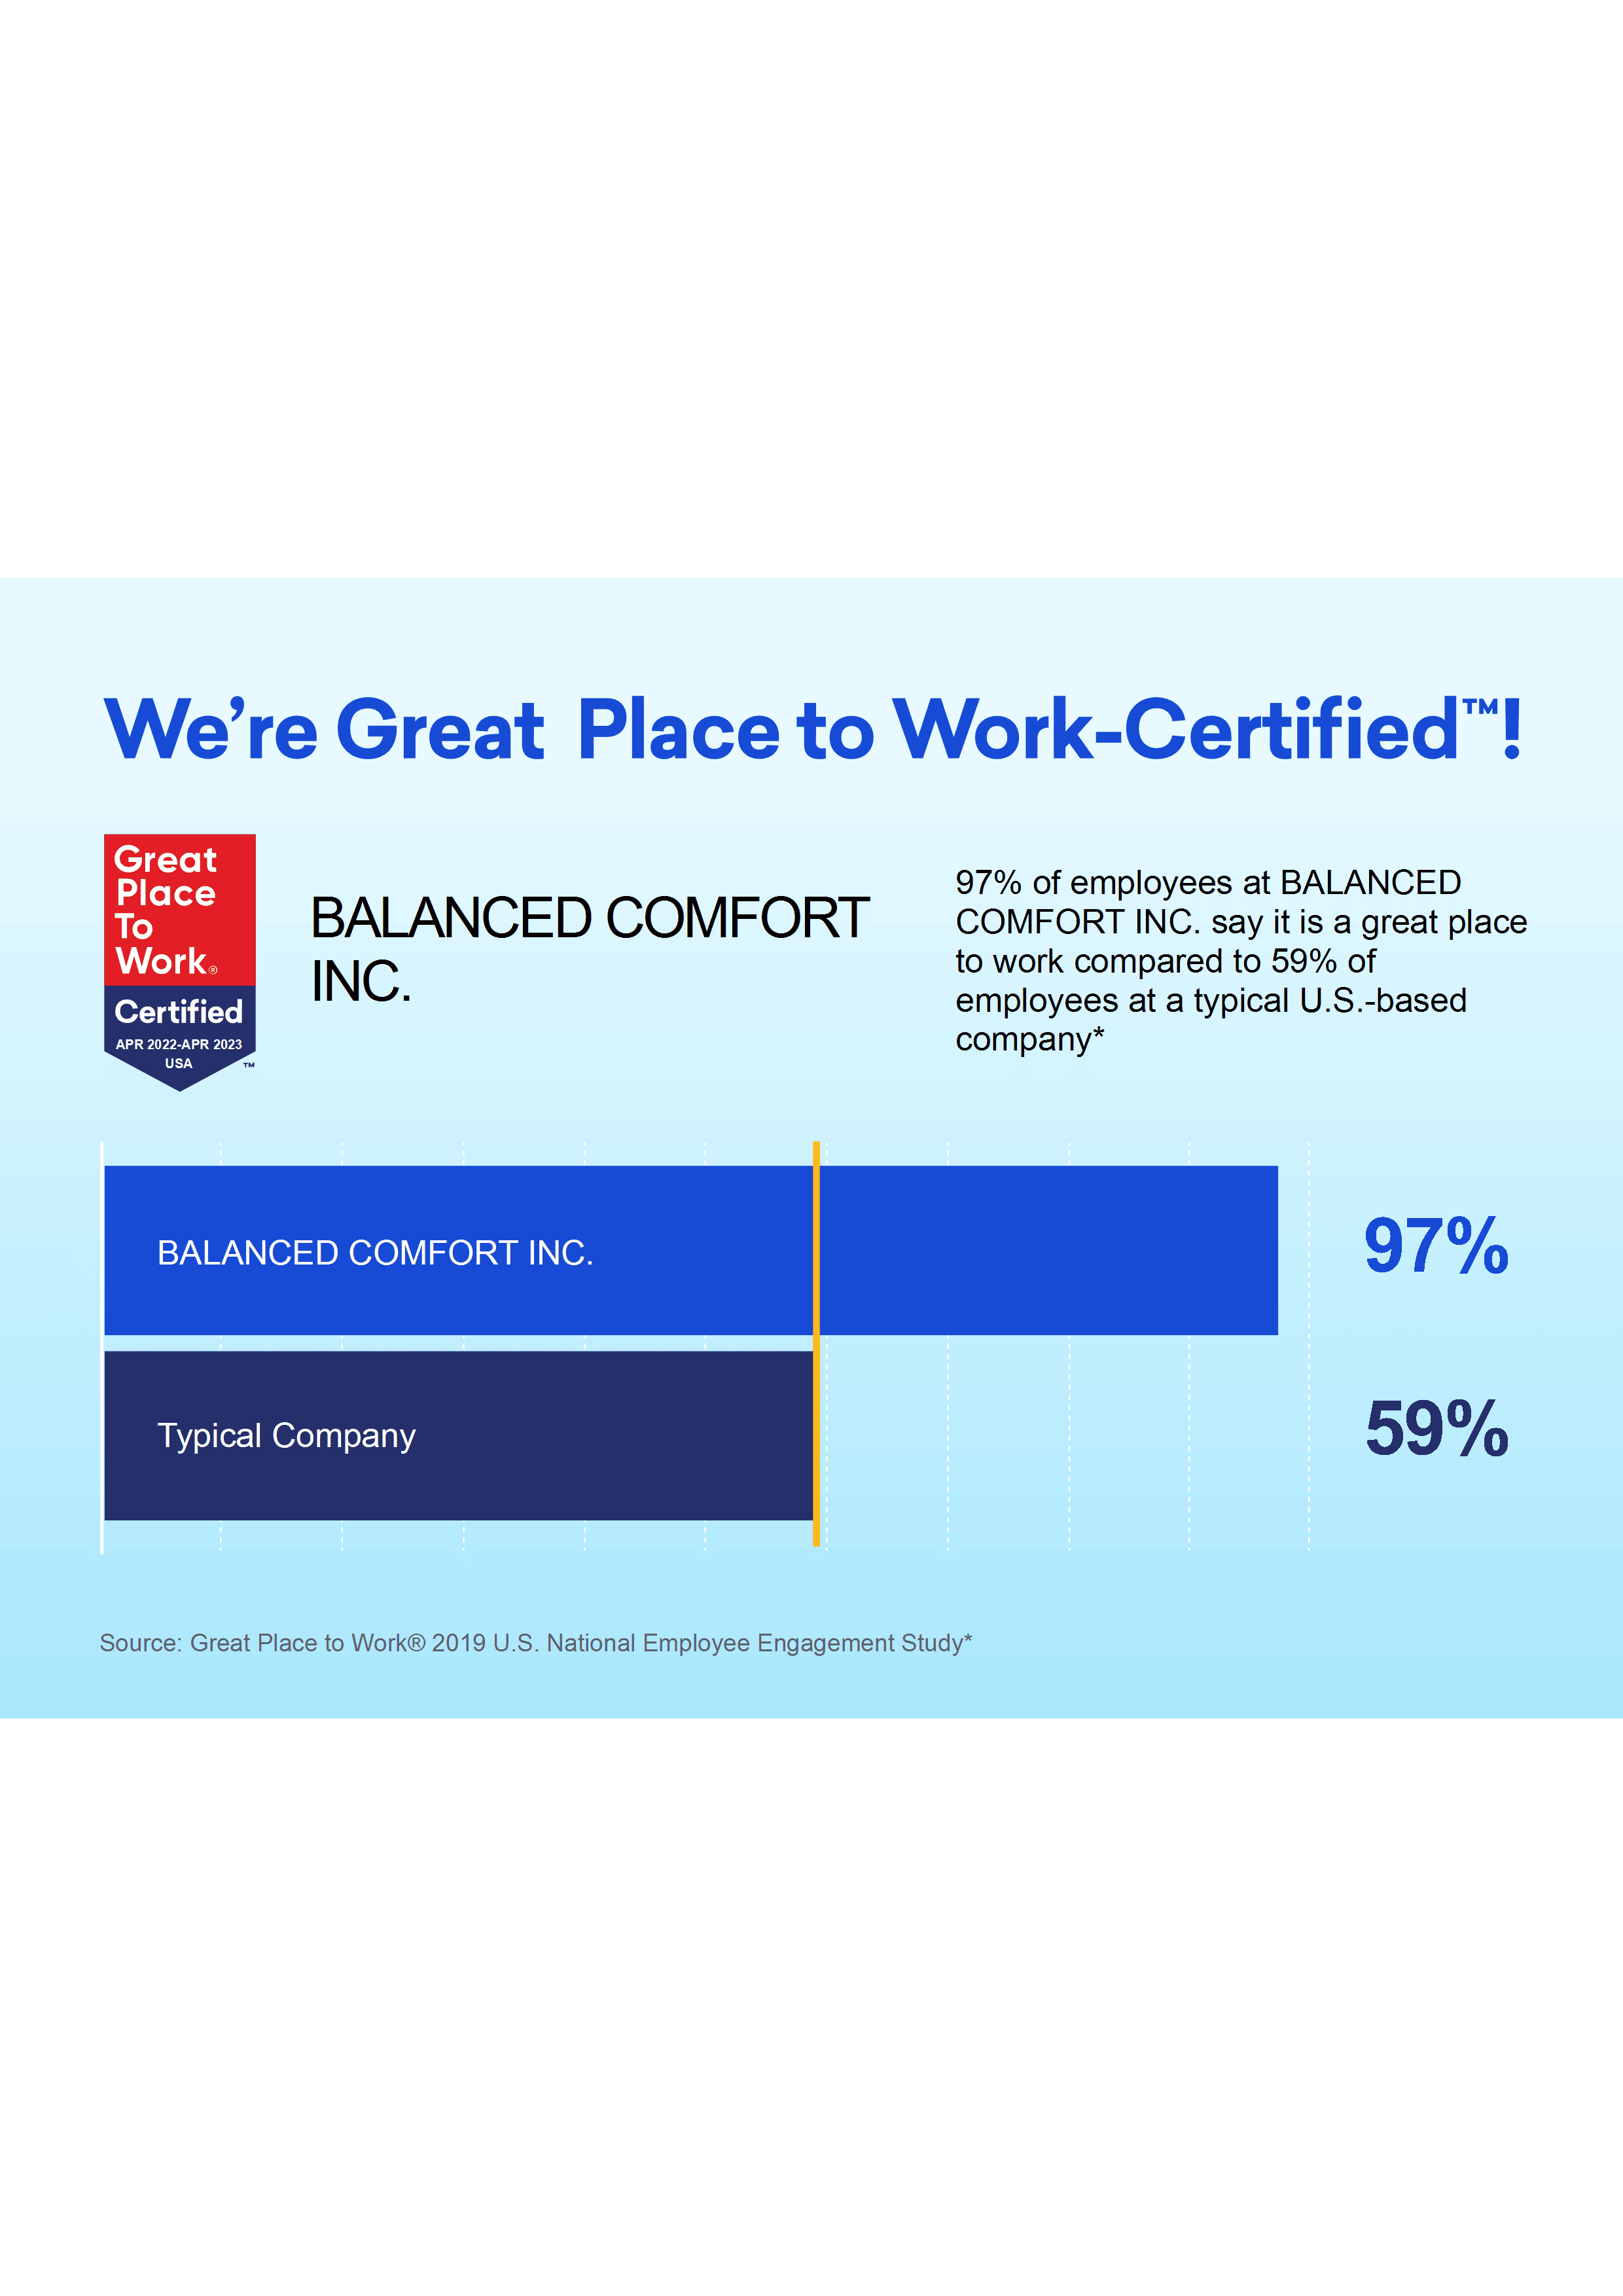 97% of Employes Say Balanced Comfort is a great place to work at!